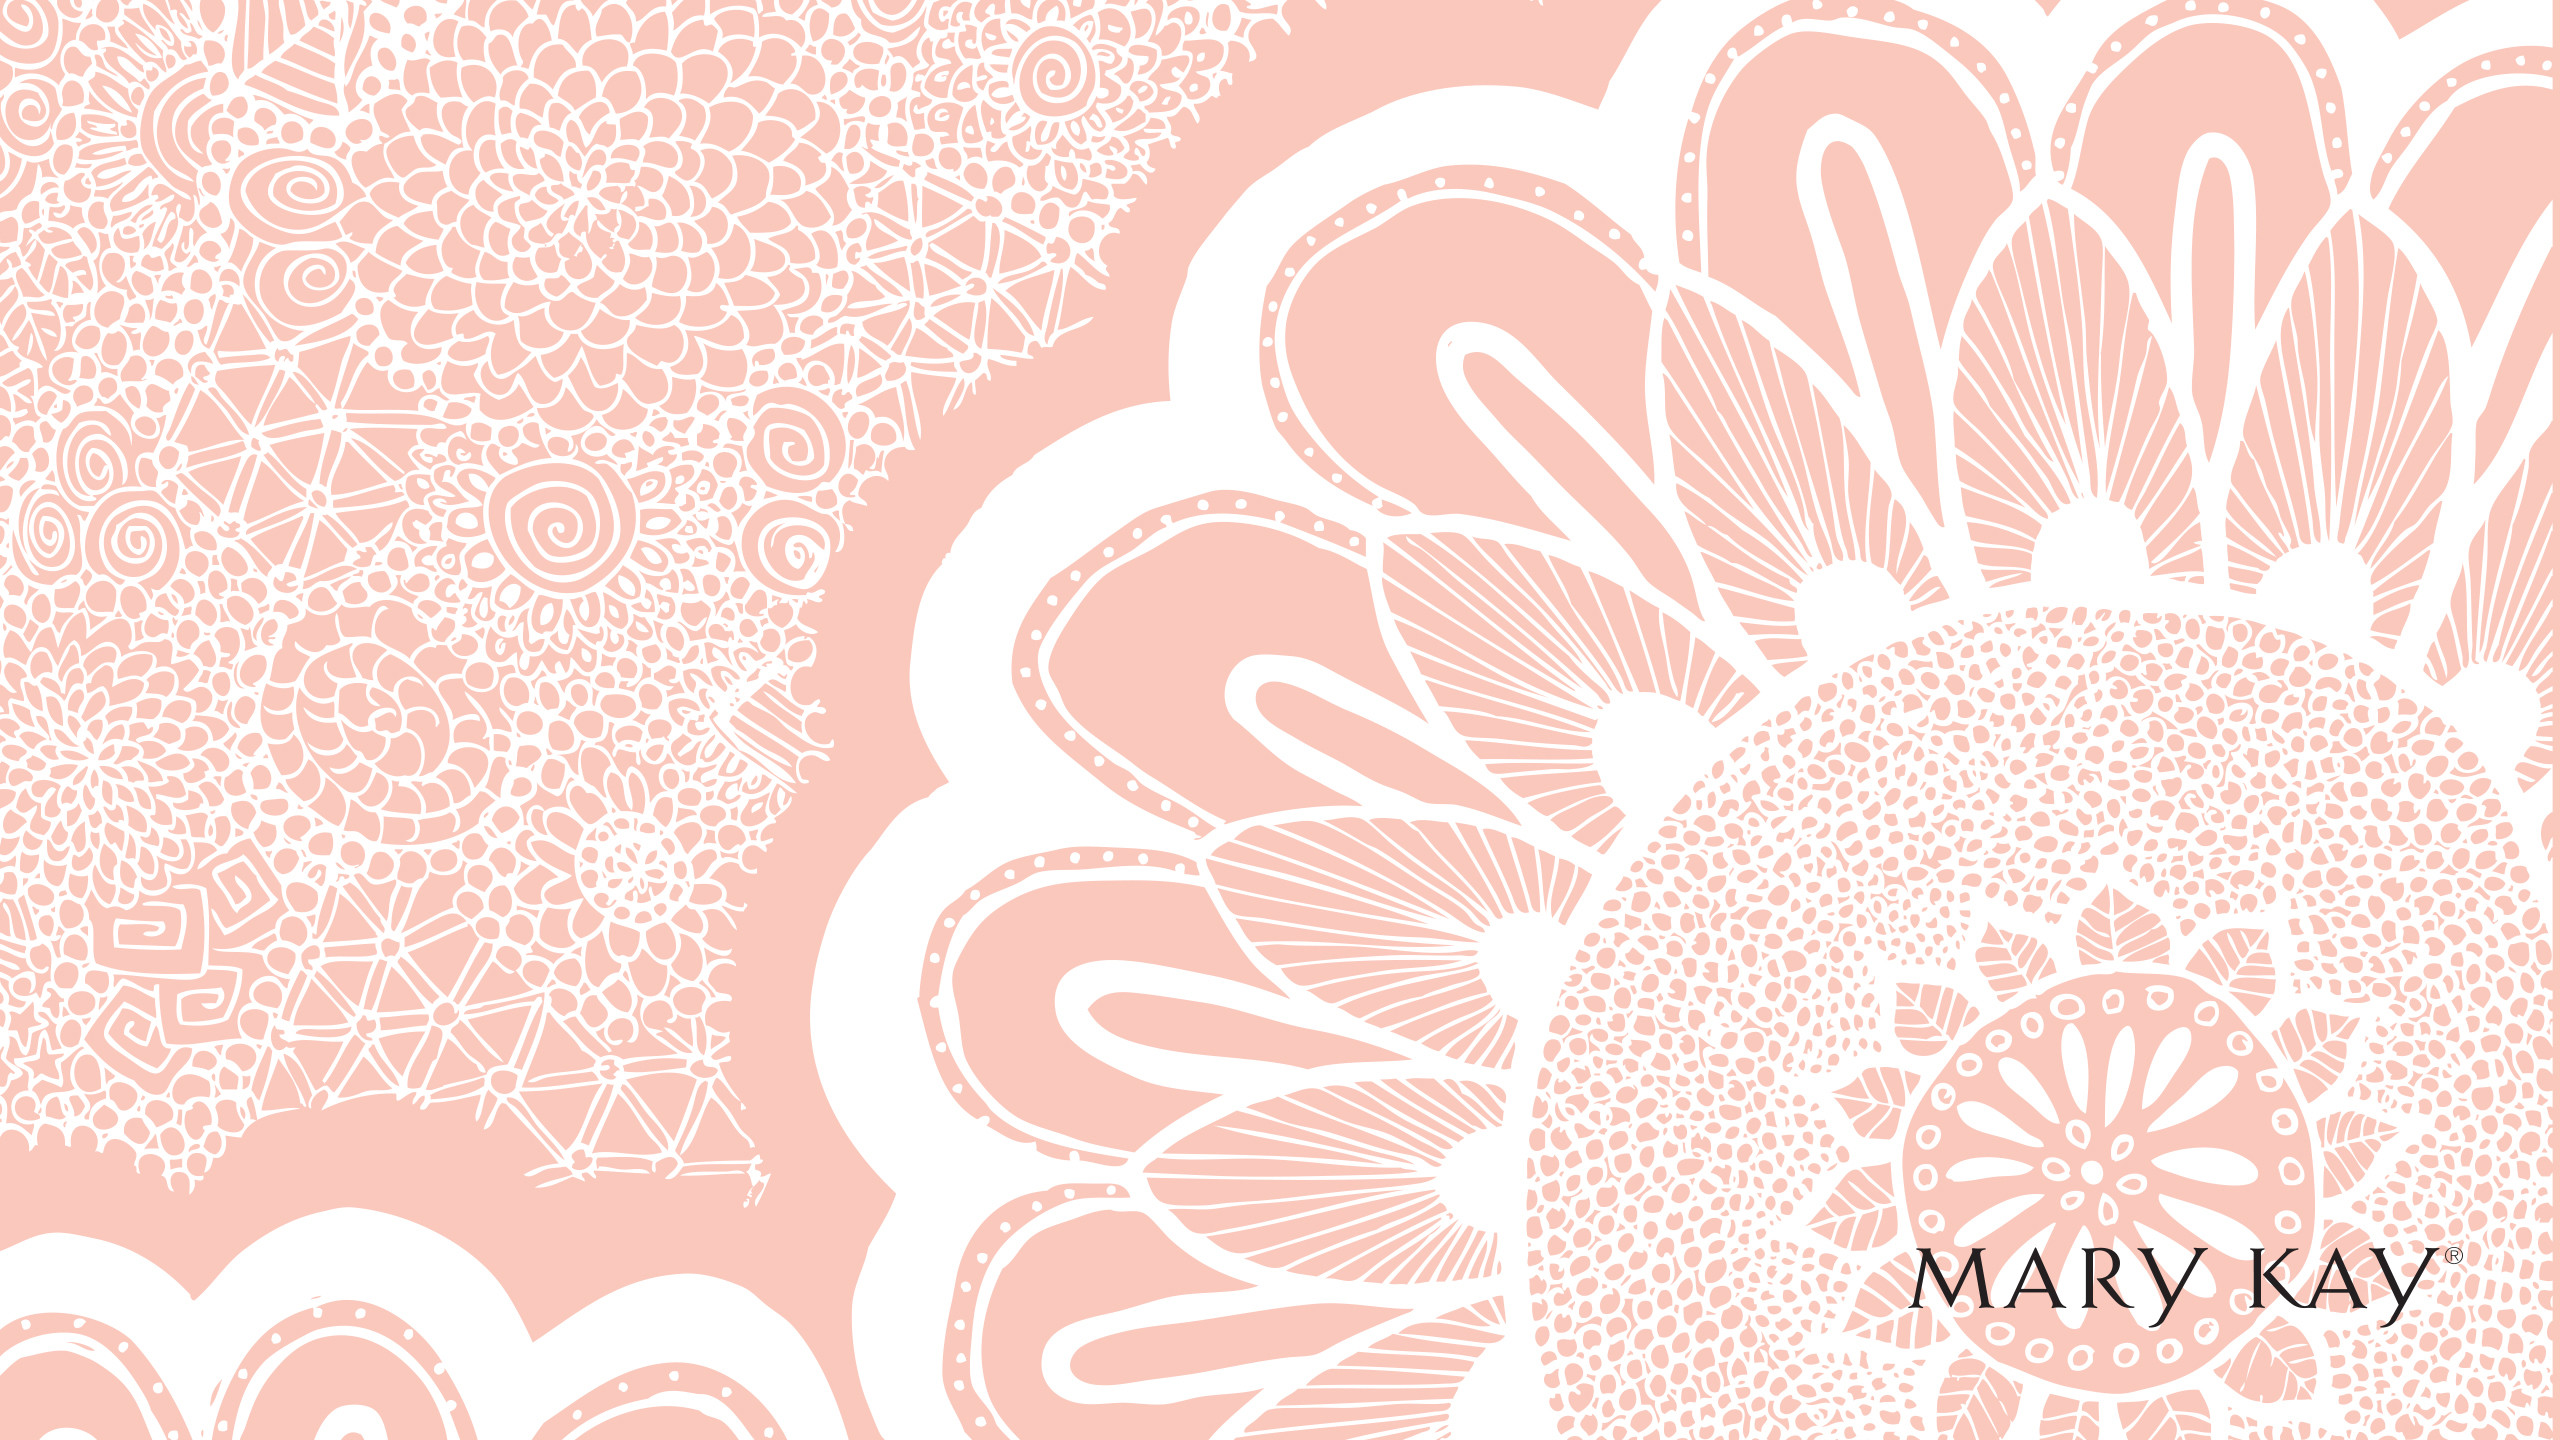 2560x1440 wallpapers mary kay - Buscar con Google